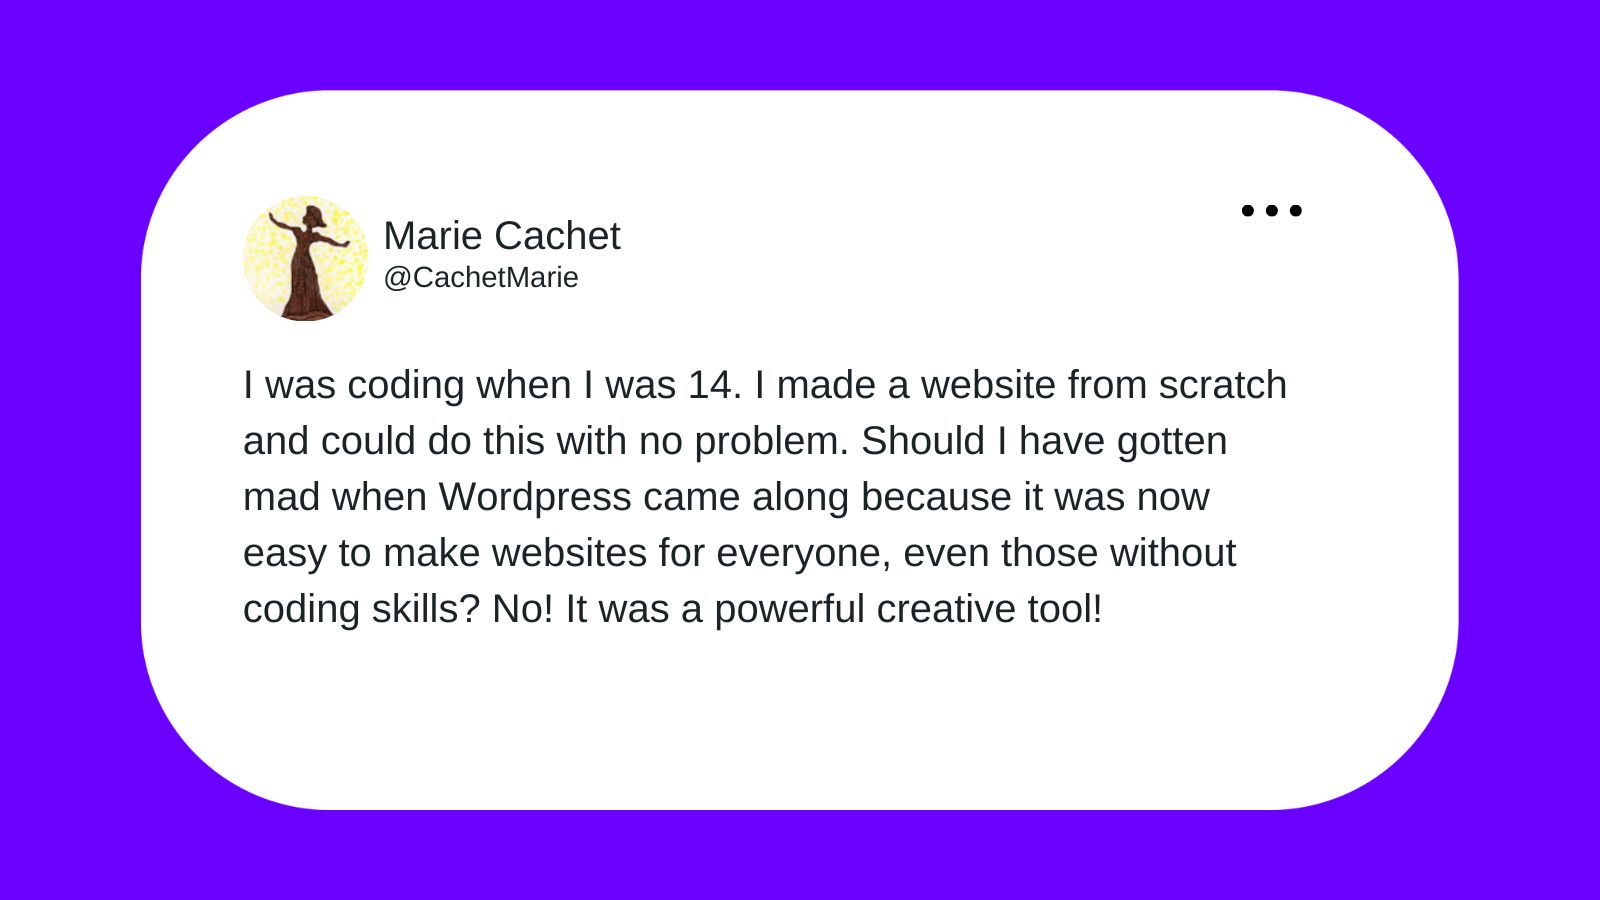 Marie Cachet tweeting "I was coding when I was 14. I made a website from scratch and could do this with no problem. Should I have gotten mad when WordPress came along because it was now easy to make websites for everyone, even those without coding skills? No! It was a powerful creative tool!"